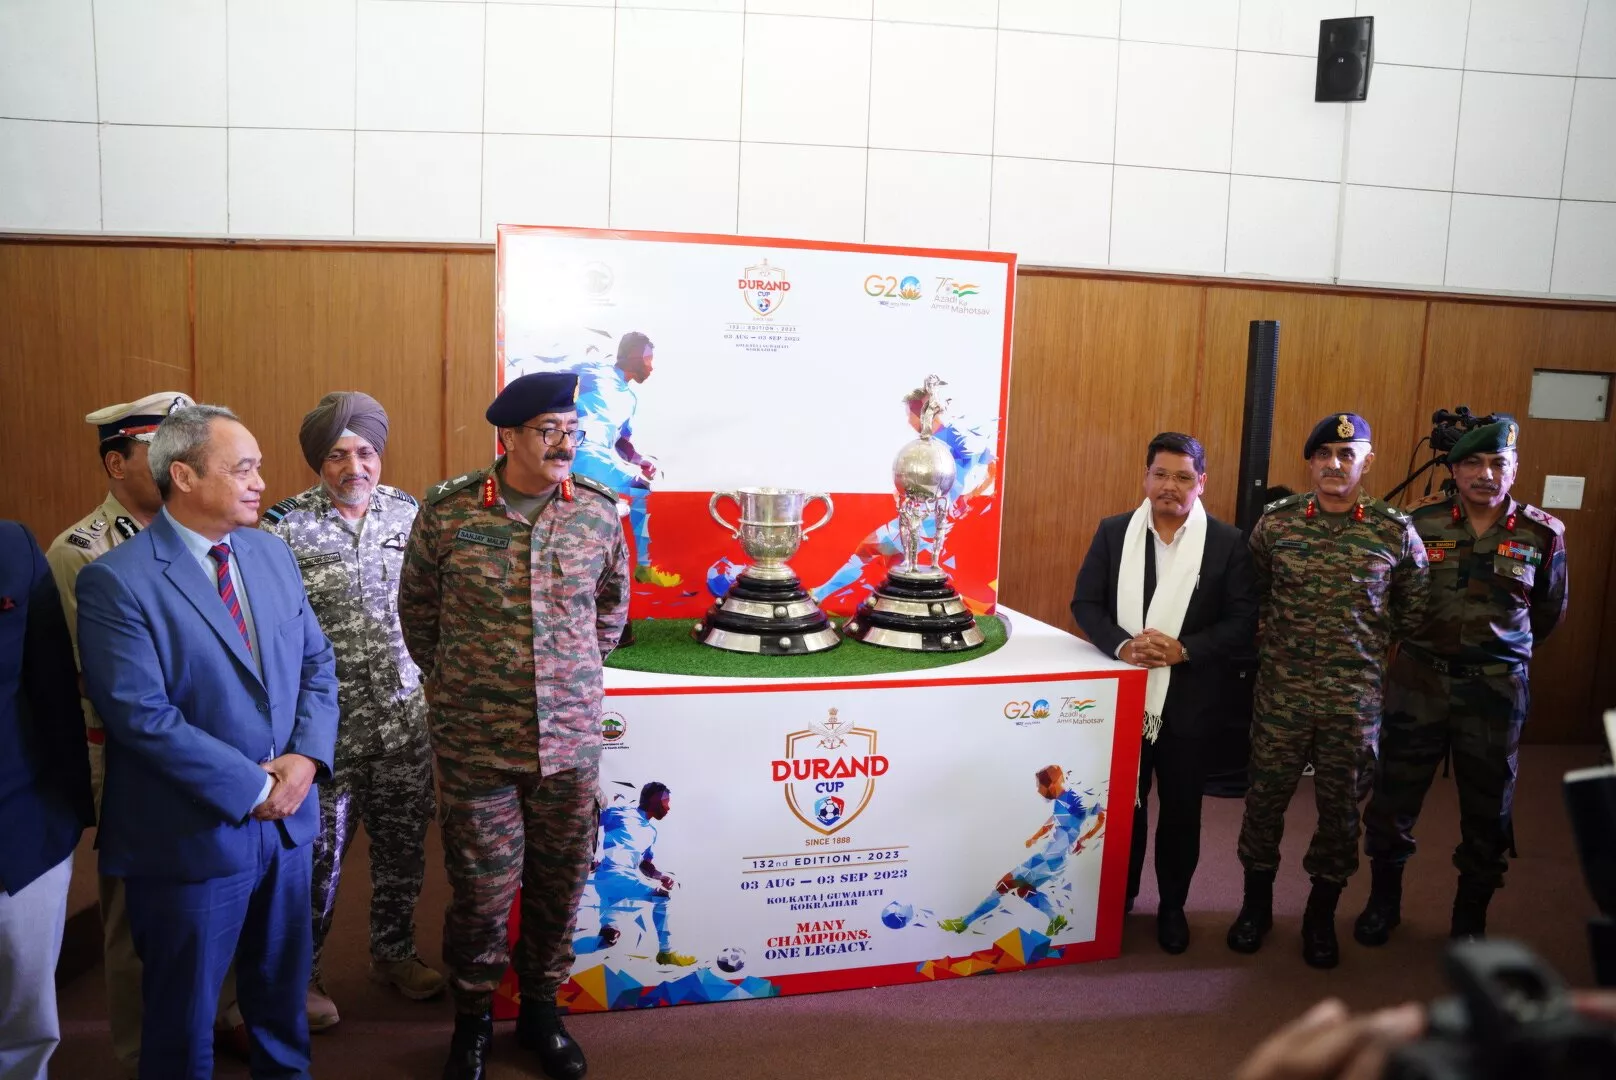 Meghalaya to be one of the hosts of Durand Cup 2024